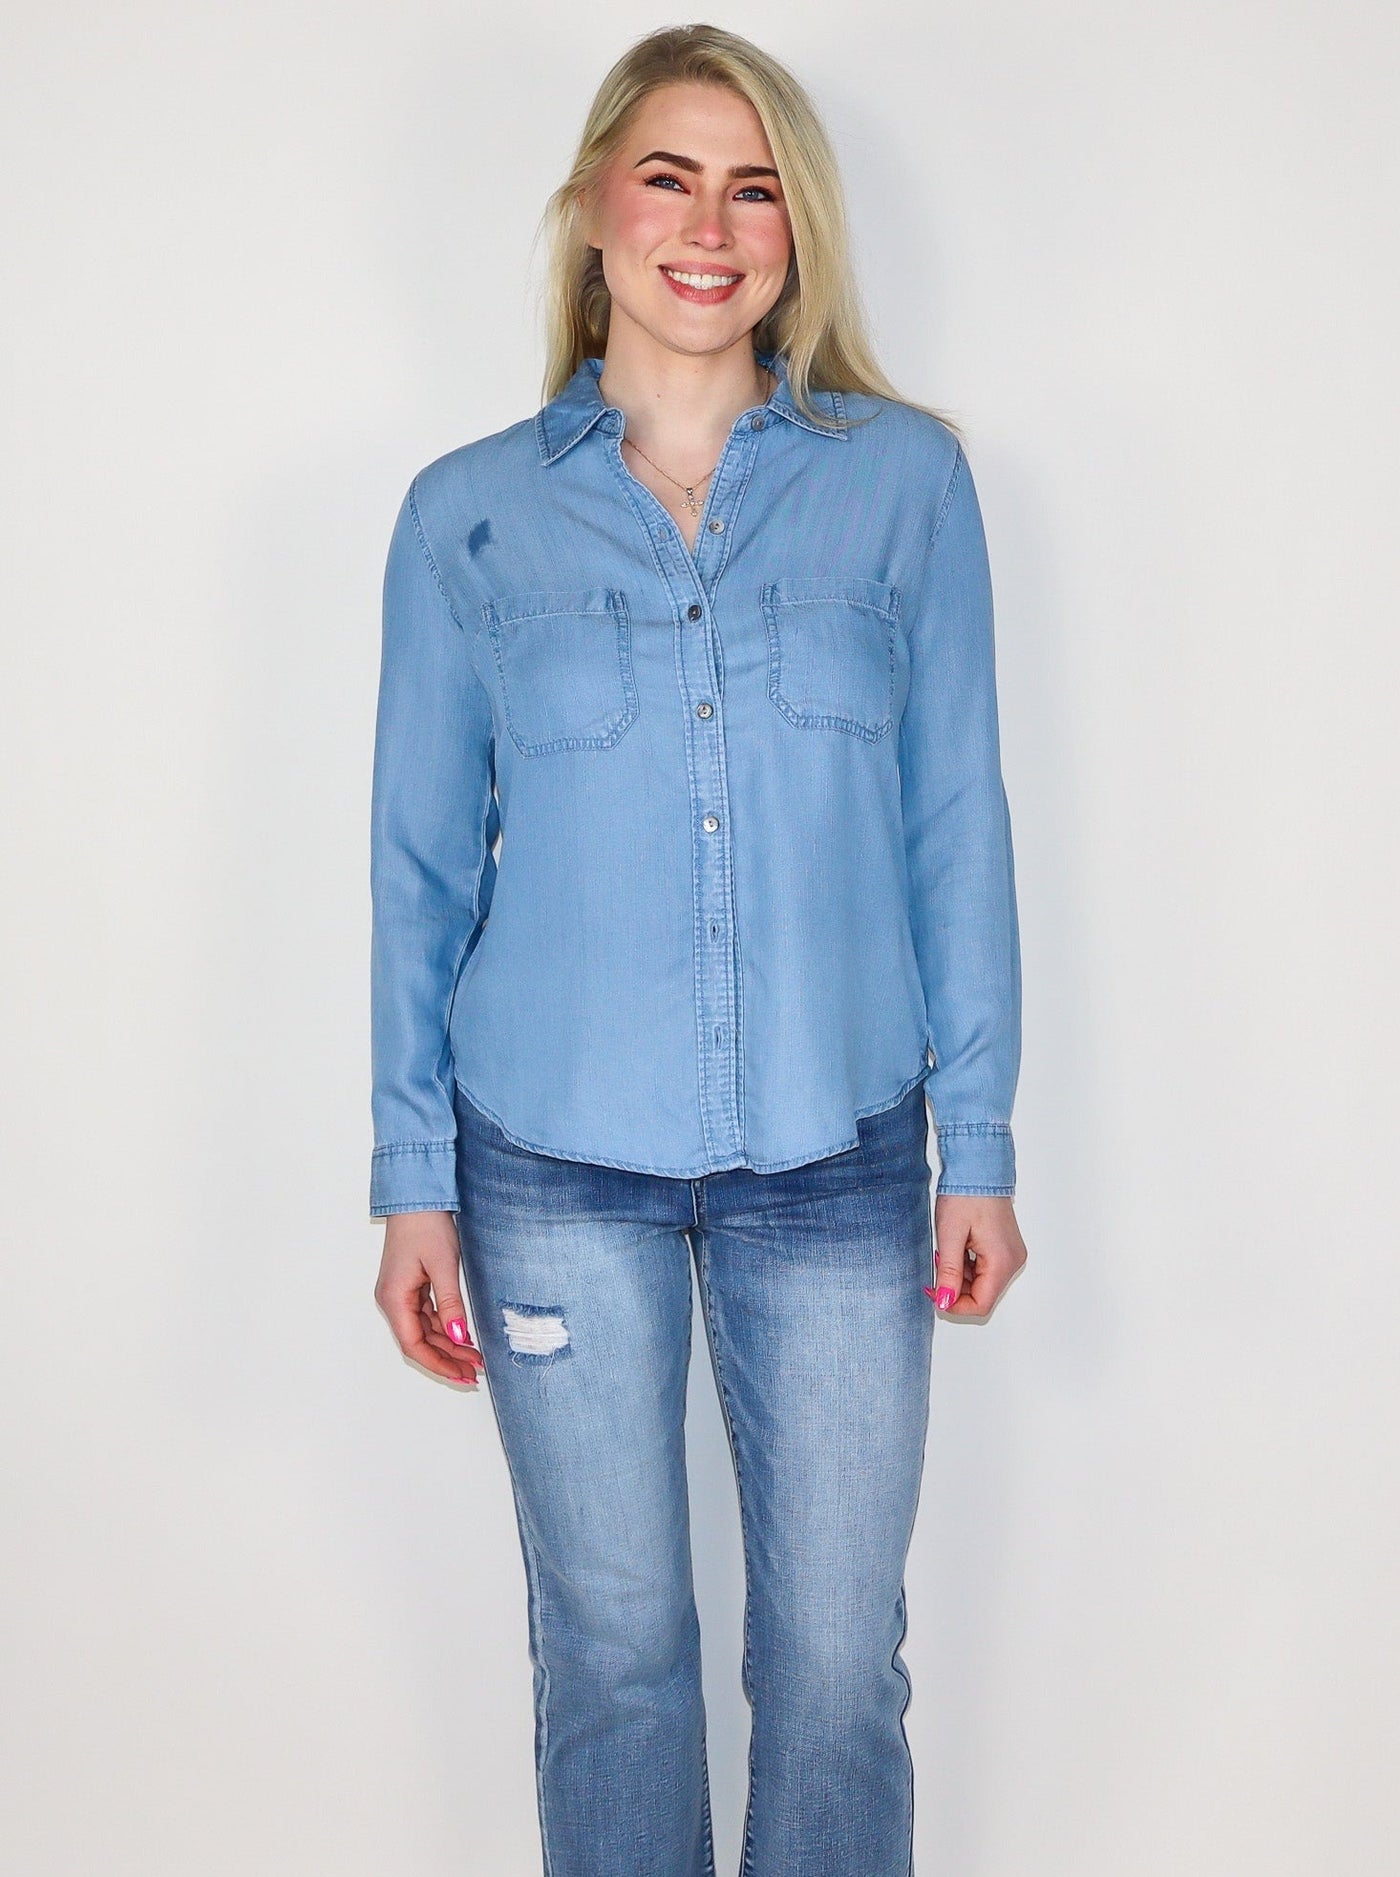 Model is wearing a light wash blue denim button up. Button up is paired with blue jeans. 